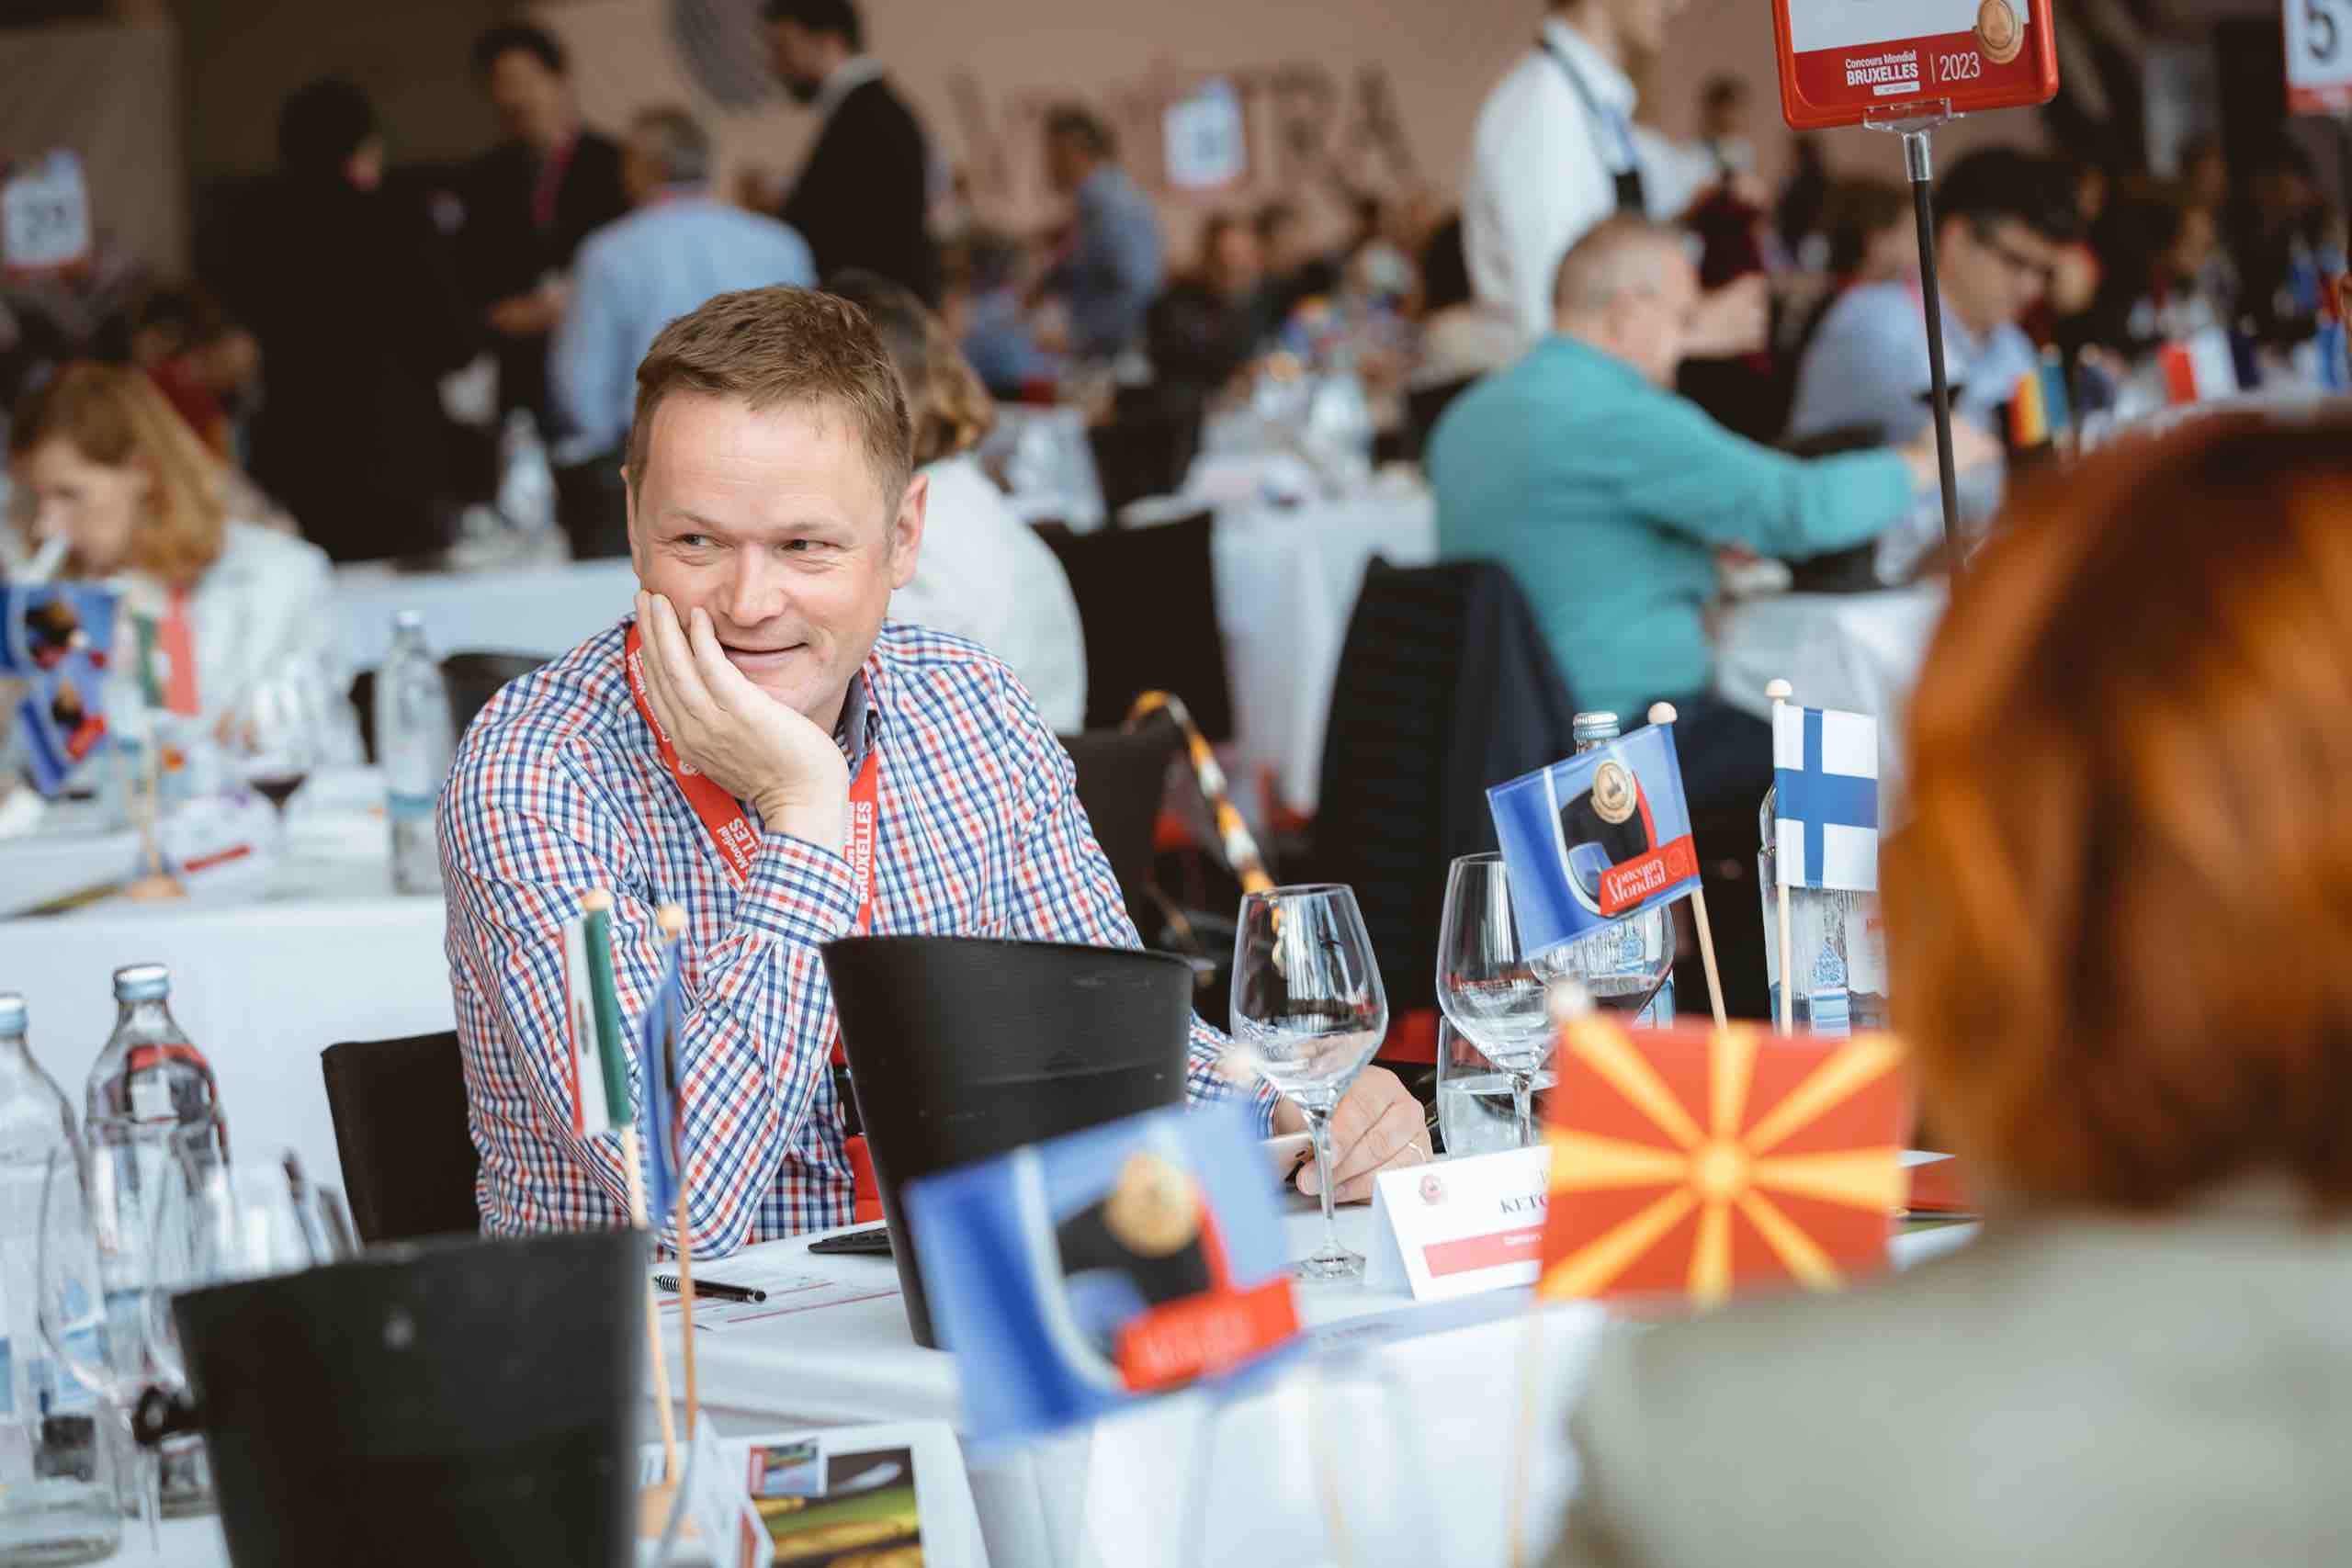 “The substantial influence of wine competitions like this, where points and medals significantly impact sales”